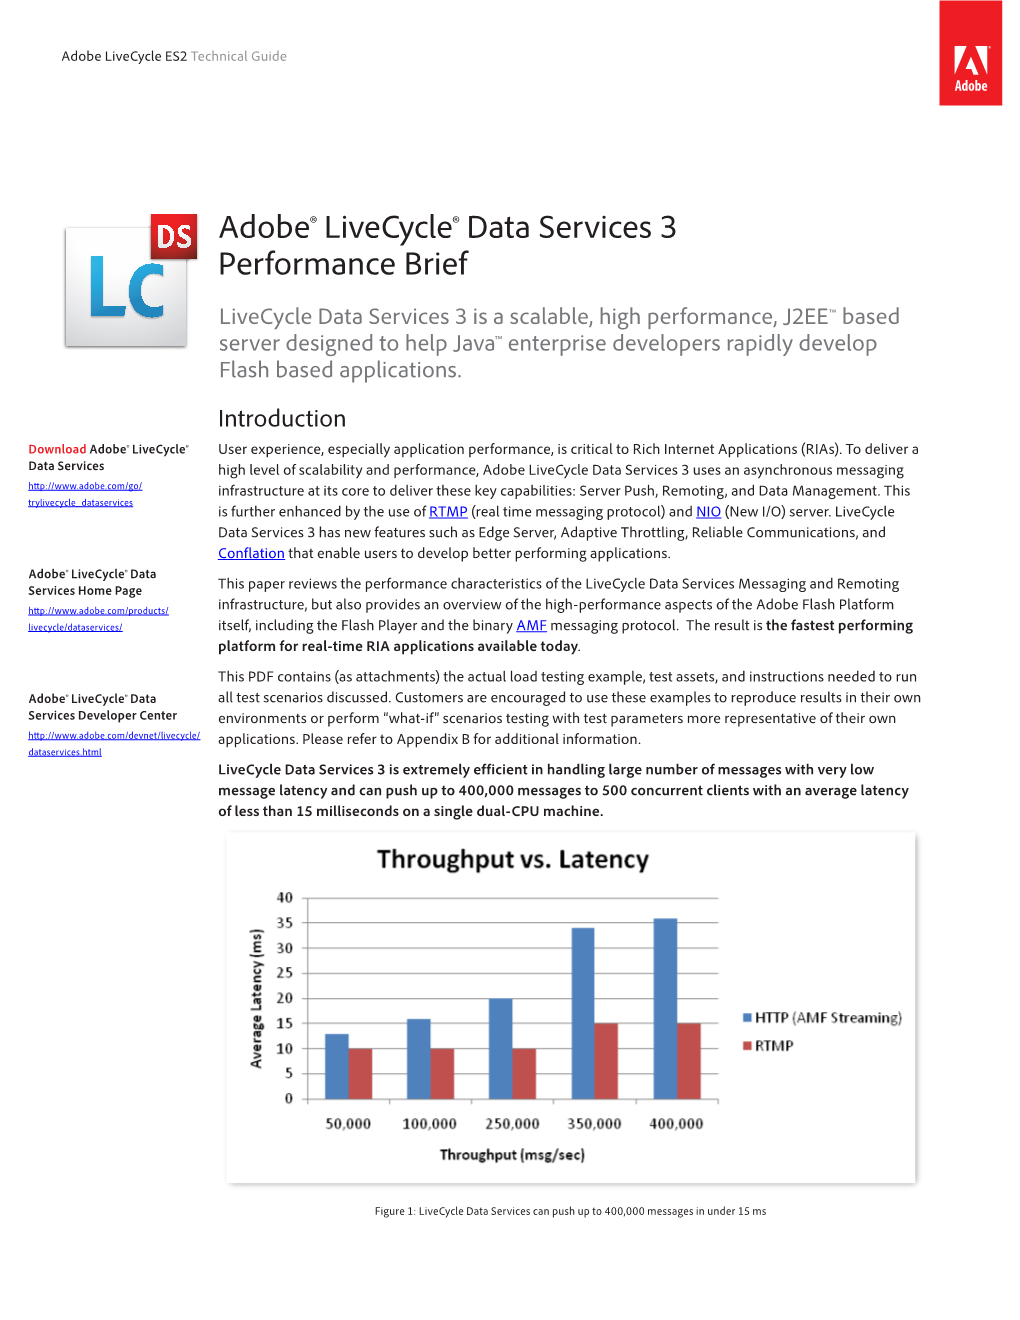 Adobe® Livecycle® Data Services 3 Performance Brief